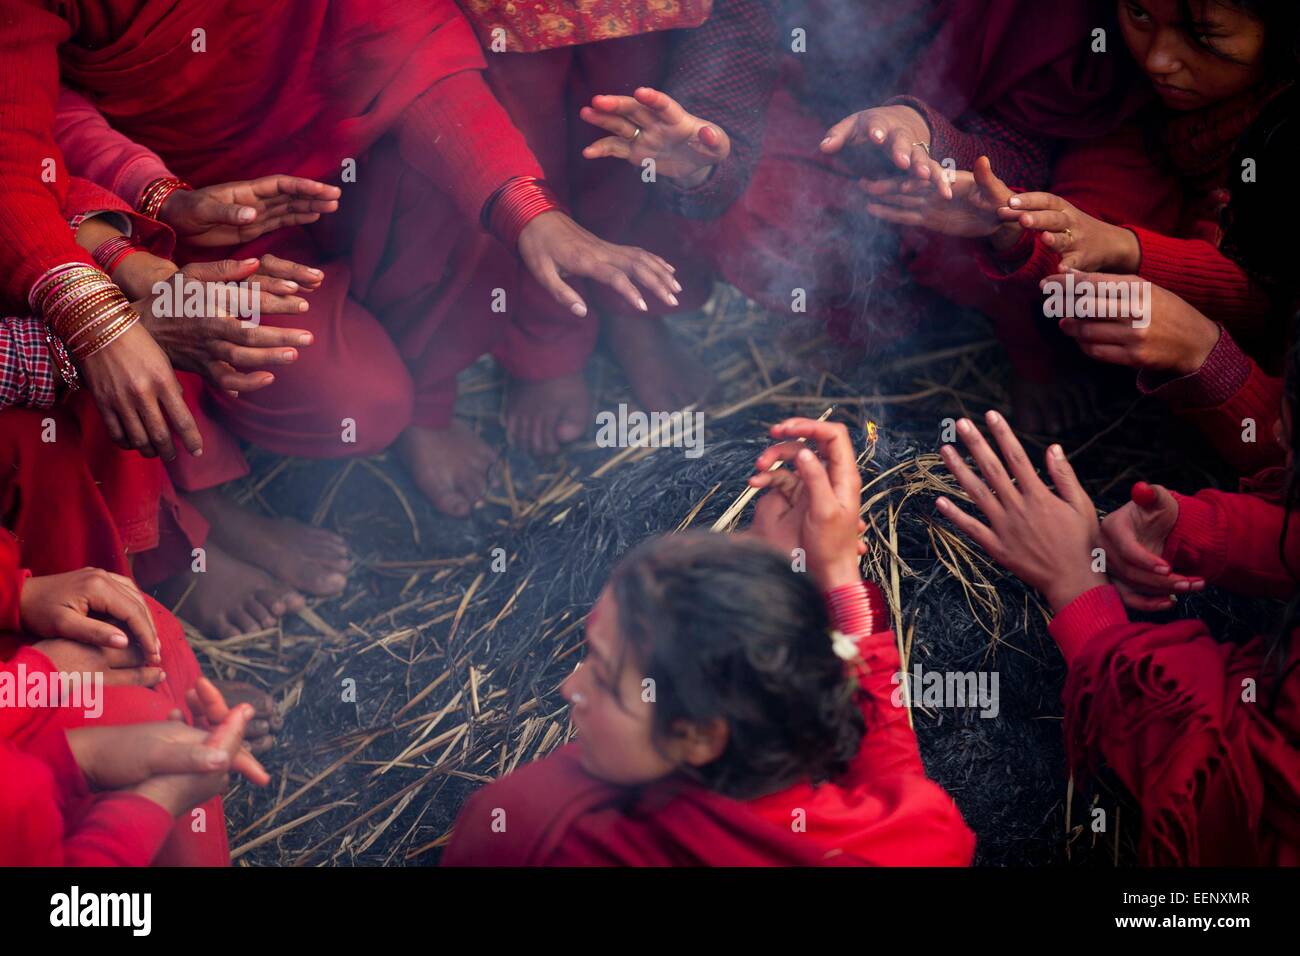 Kathmandu, Nepal. 20th Jan, 2015. Nepalese Hindu women devotees warm themselves after taking a holy dip in the Bagmati River during the Madhav Narayan festival at Pashupatinath in Kathmandu, Nepal, Jan. 20, 2015. Nepalese Hindu women observe a fast and pray to Goddess Swasthani for longevity of their husbands and family prosperity during the month-long festival. © Pratap Thapa/Xinhua/Alamy Live News Stock Photo